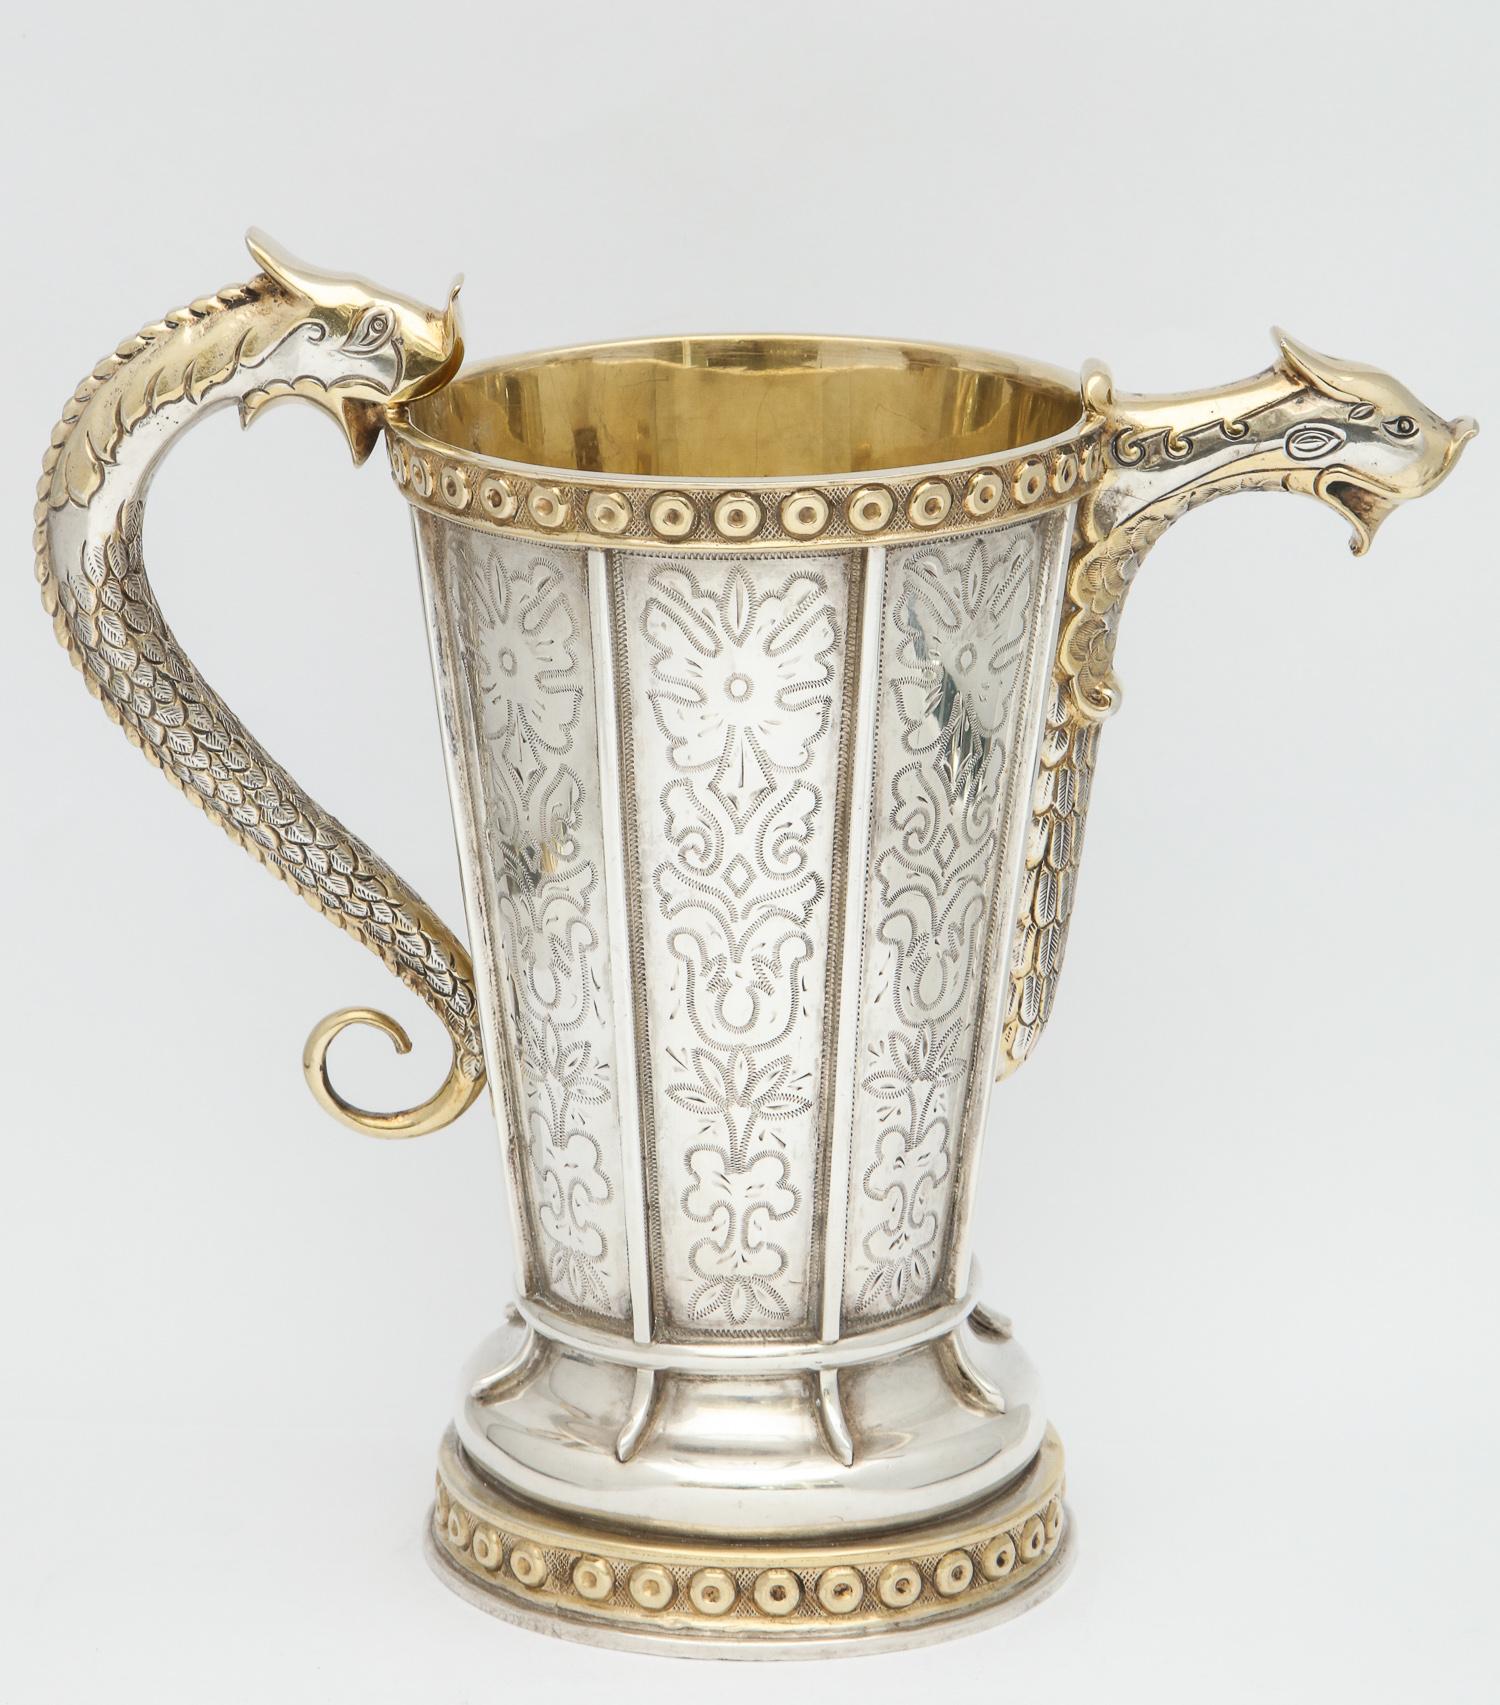 Quetzalcoatl-Inspired Sterling Silver Gilt Pitcher by Tane 4